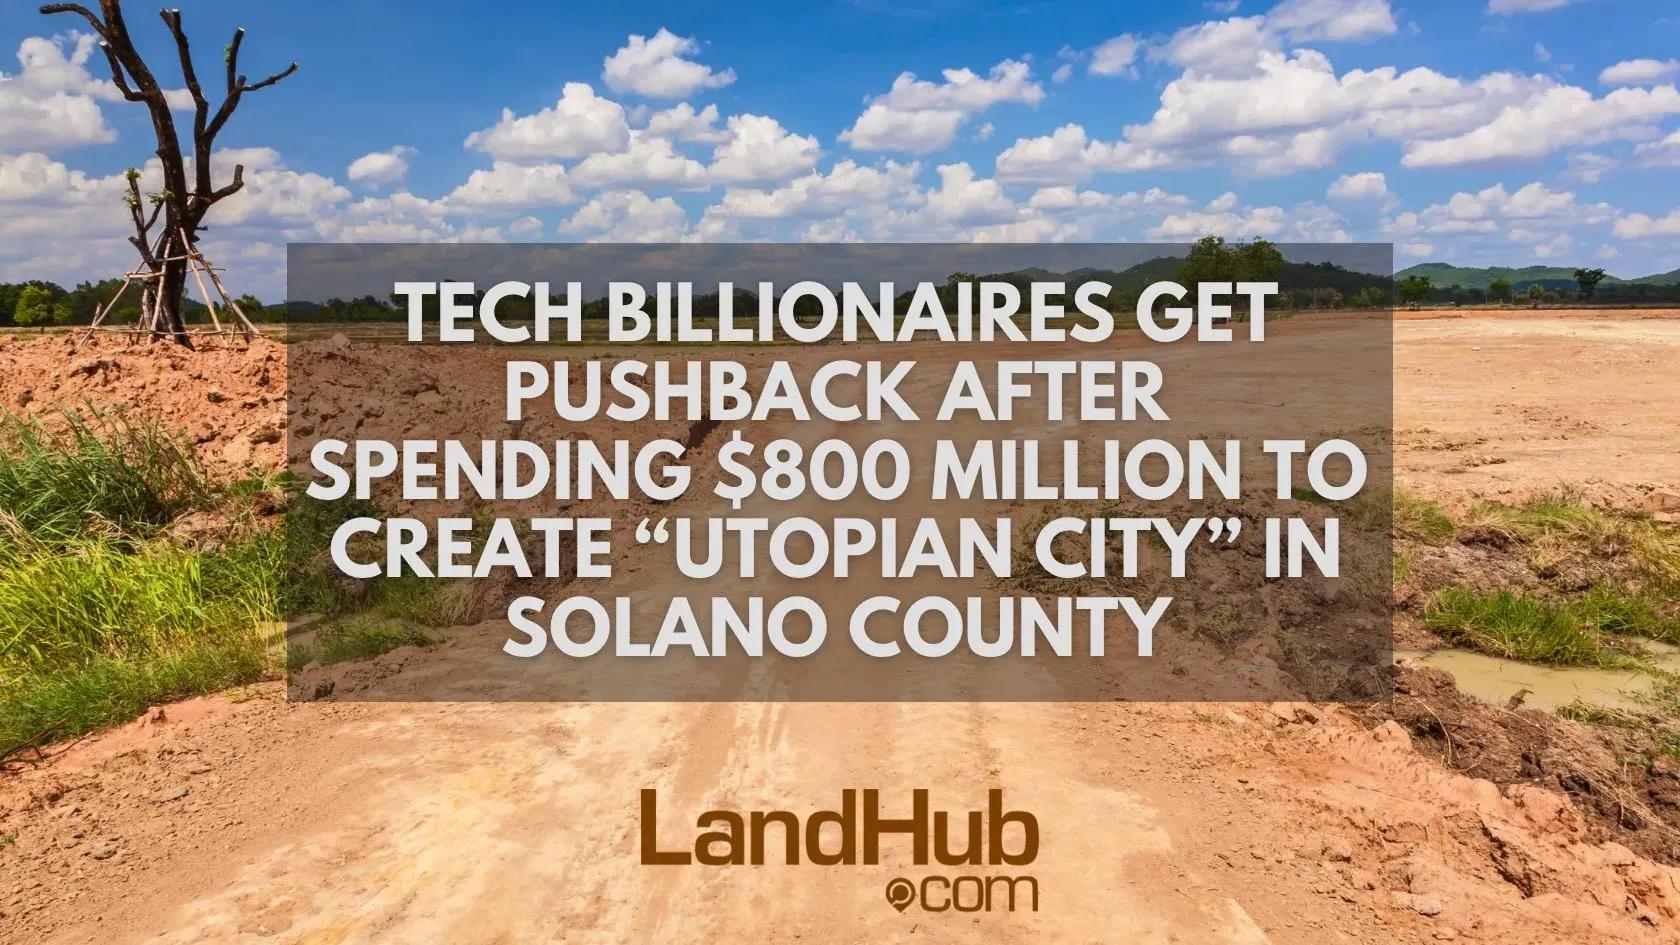 tech billionaires get pushback after spending $800 million to create “utopian city” in solano county